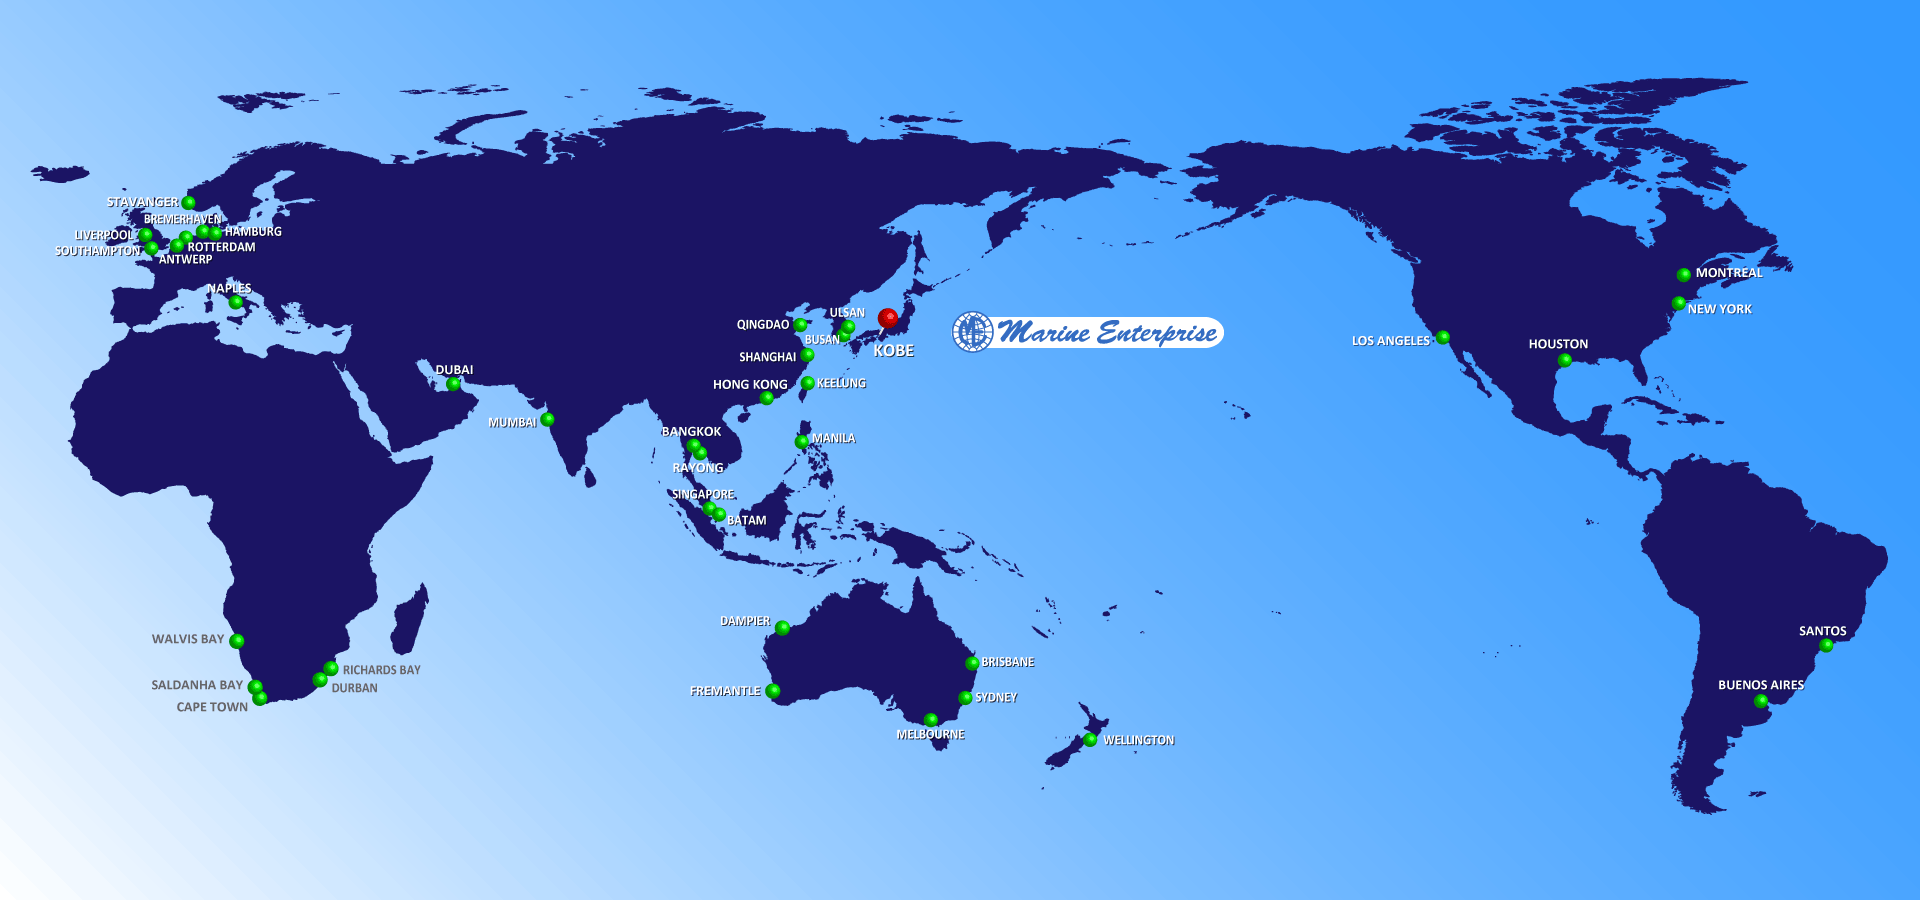 Map of the global service station network of ship repair specialist Marine Enterprise